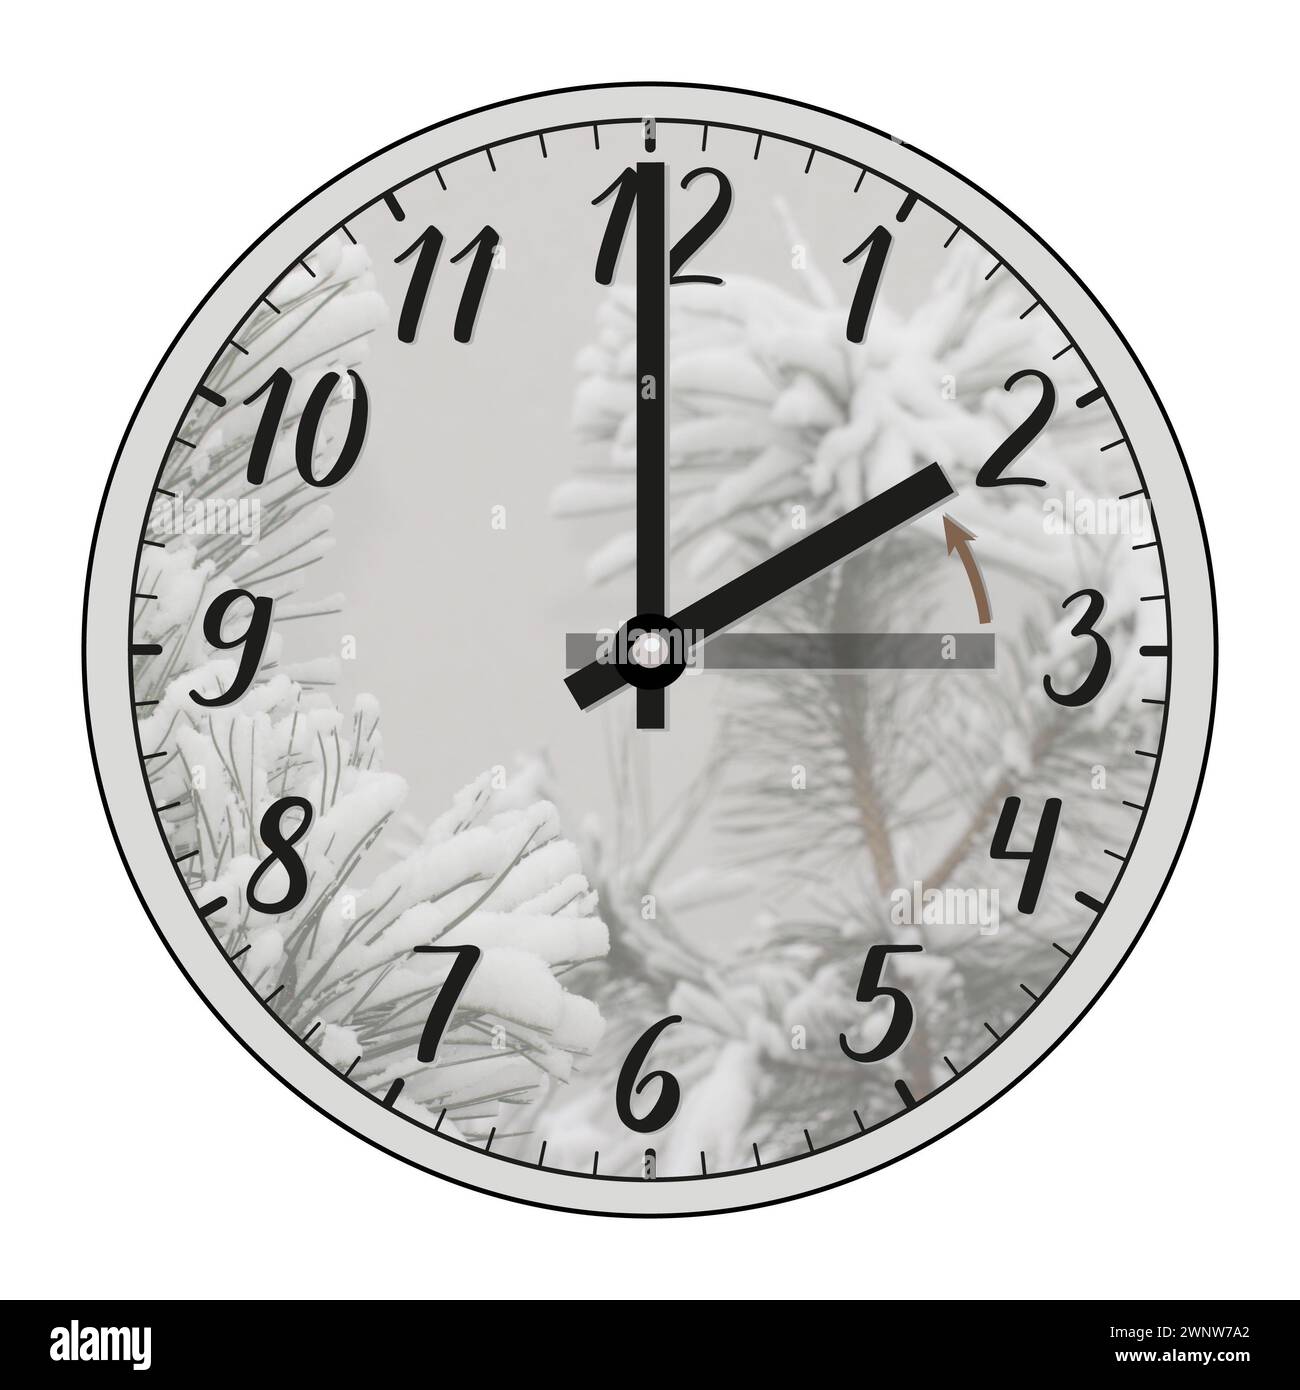 The clock shows the hand moving backward from 3 a.m. in autumn to 2 a.m. in winter. The end of daylight saving time. The transition of time. Stock Photo